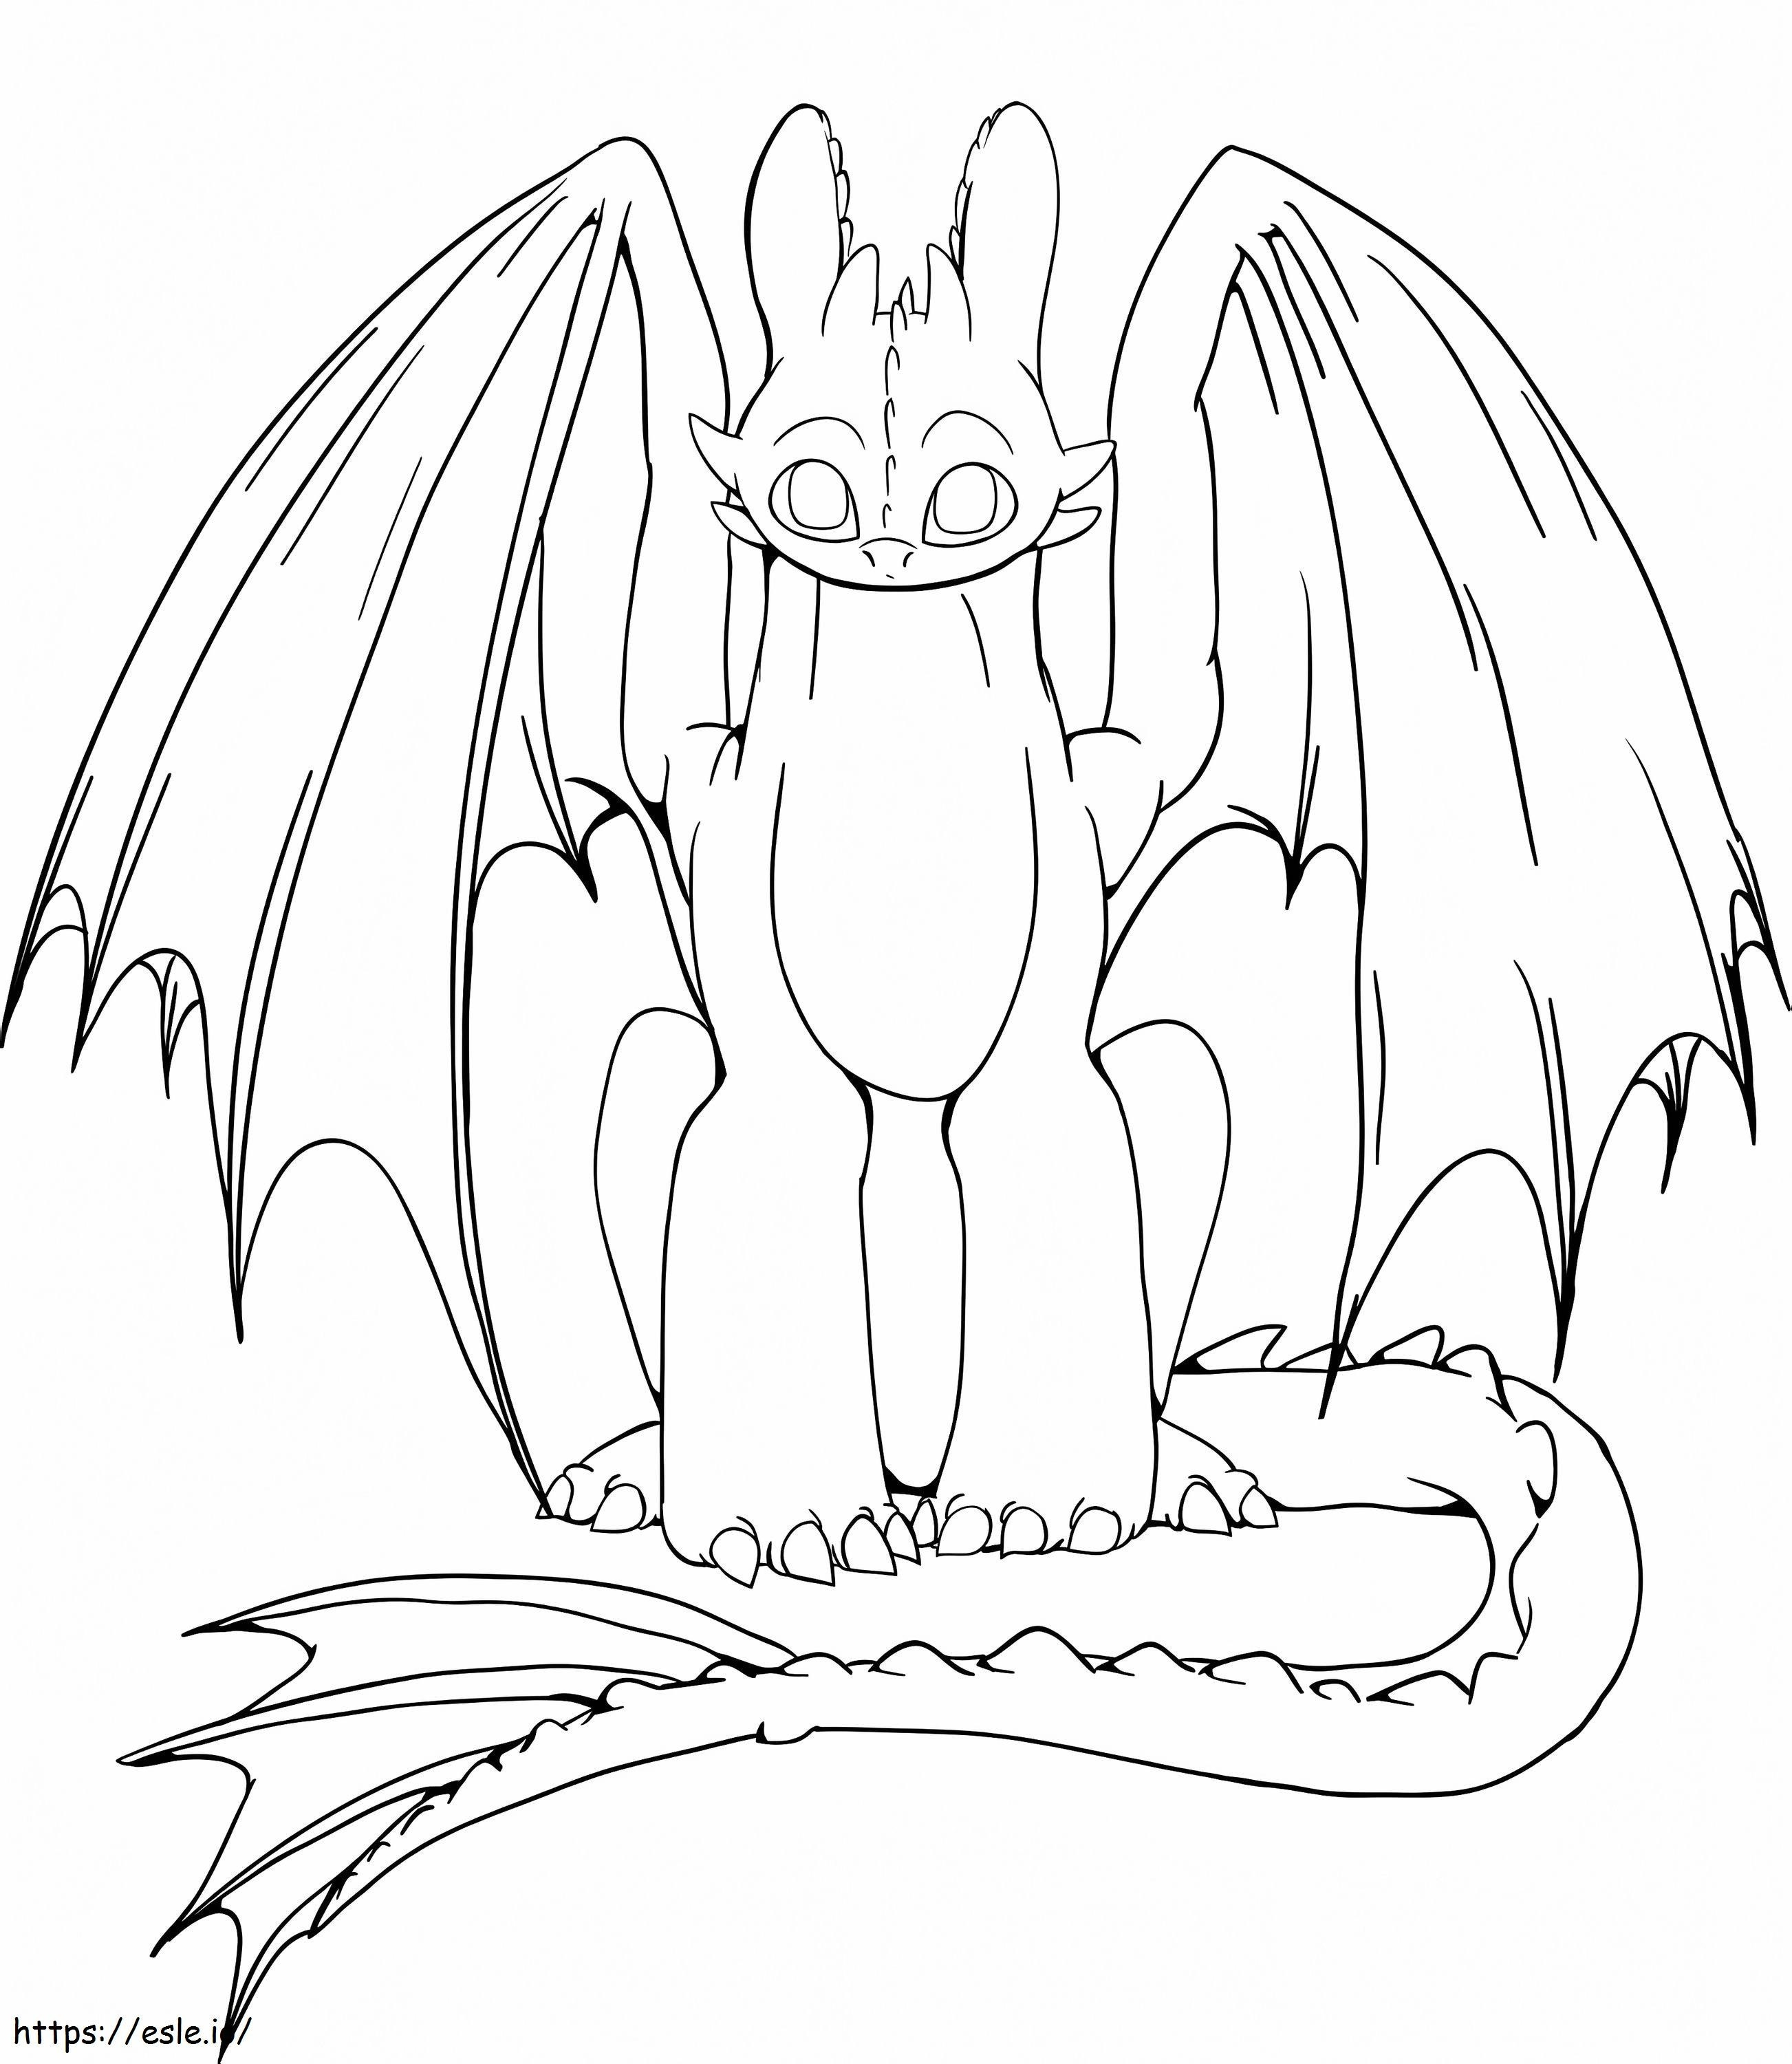 1585879906 Toothless coloring page